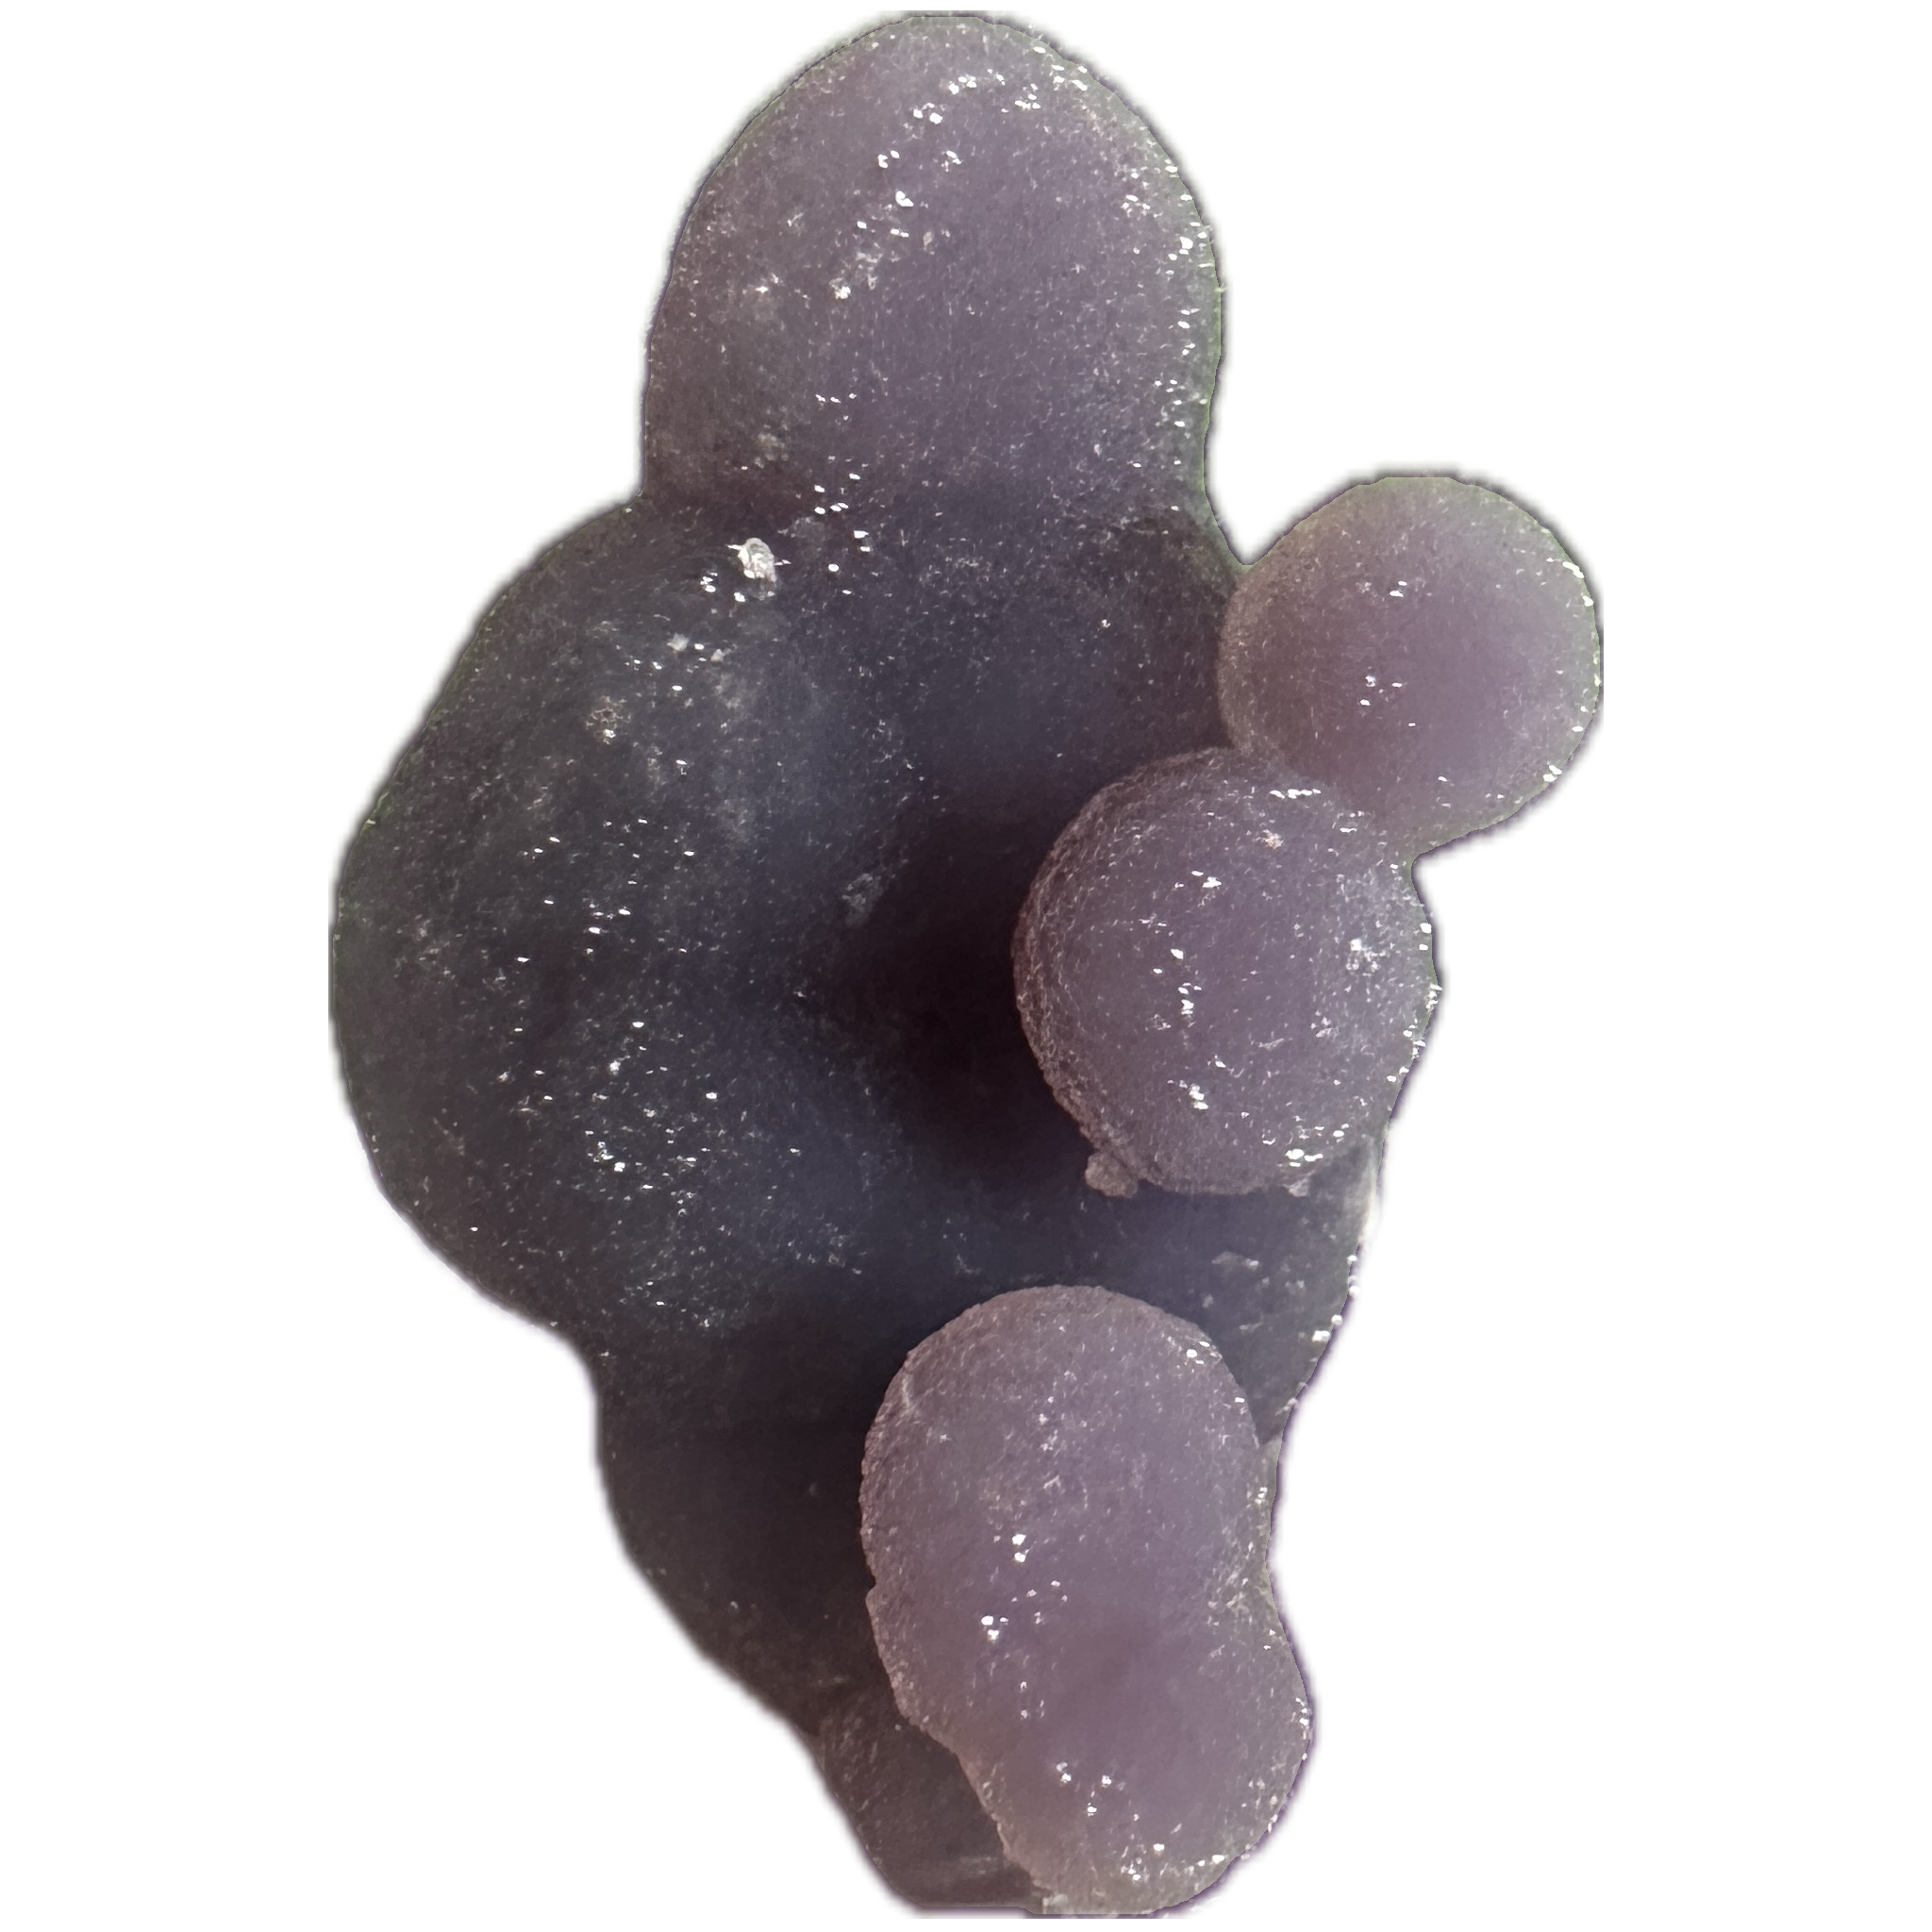 Grape Agate thumbnail mineral, Indonesia Prehistoric Online